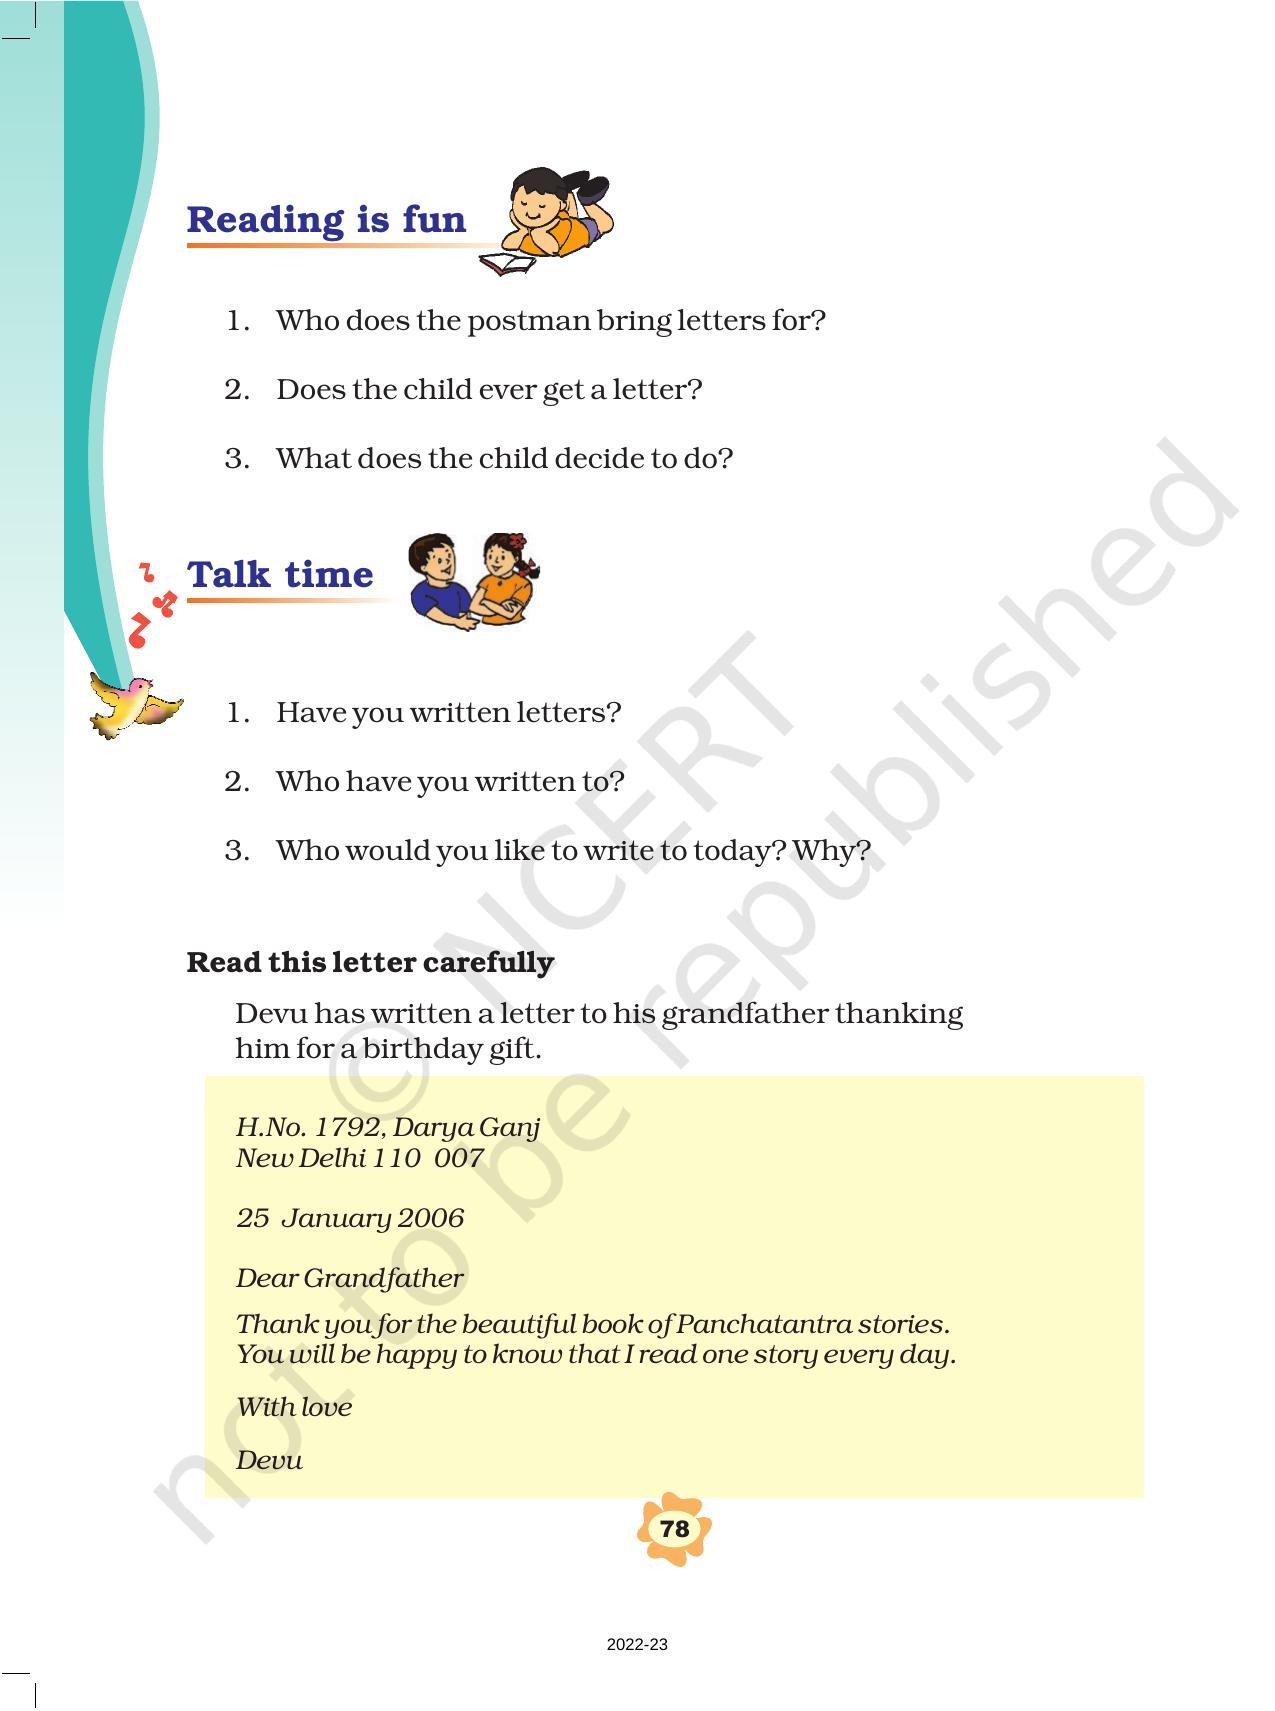 NCERT Book for Class 3 English: Unit VIII.1-What’s in the Mailbox? - Page 2